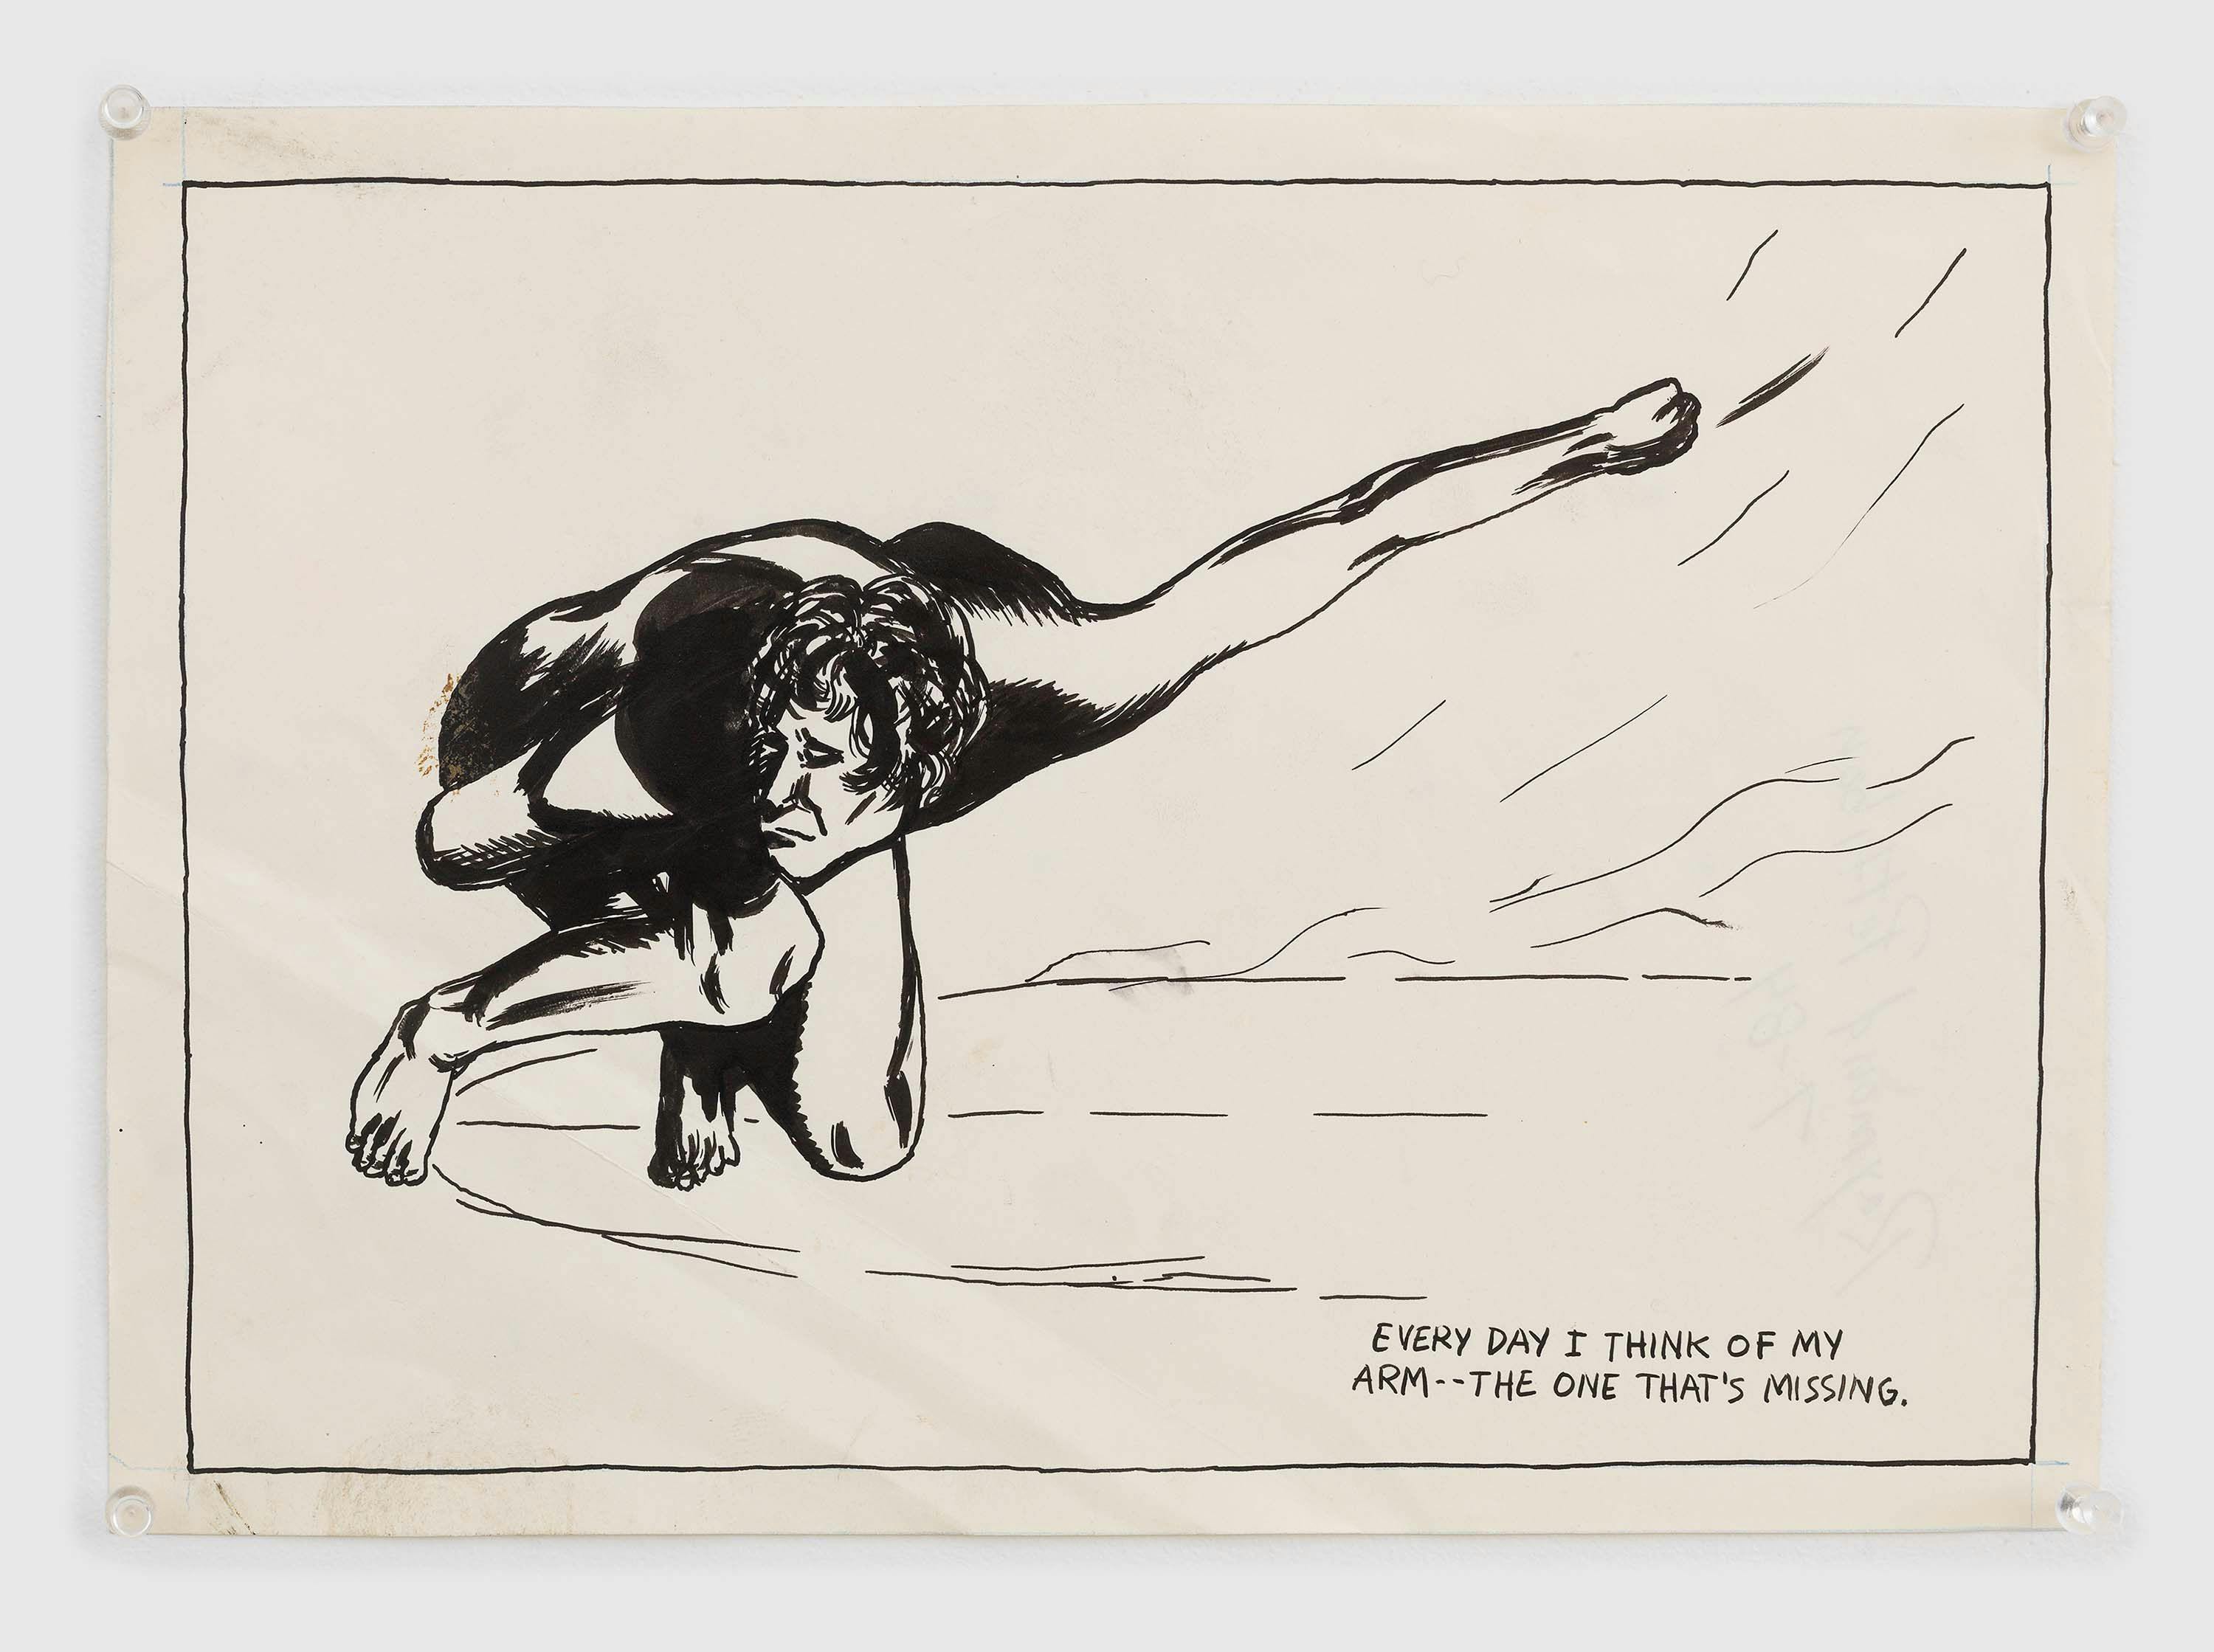 A drawing by Raymond Pettibon titled No Title (Every day I...), dated 1984.